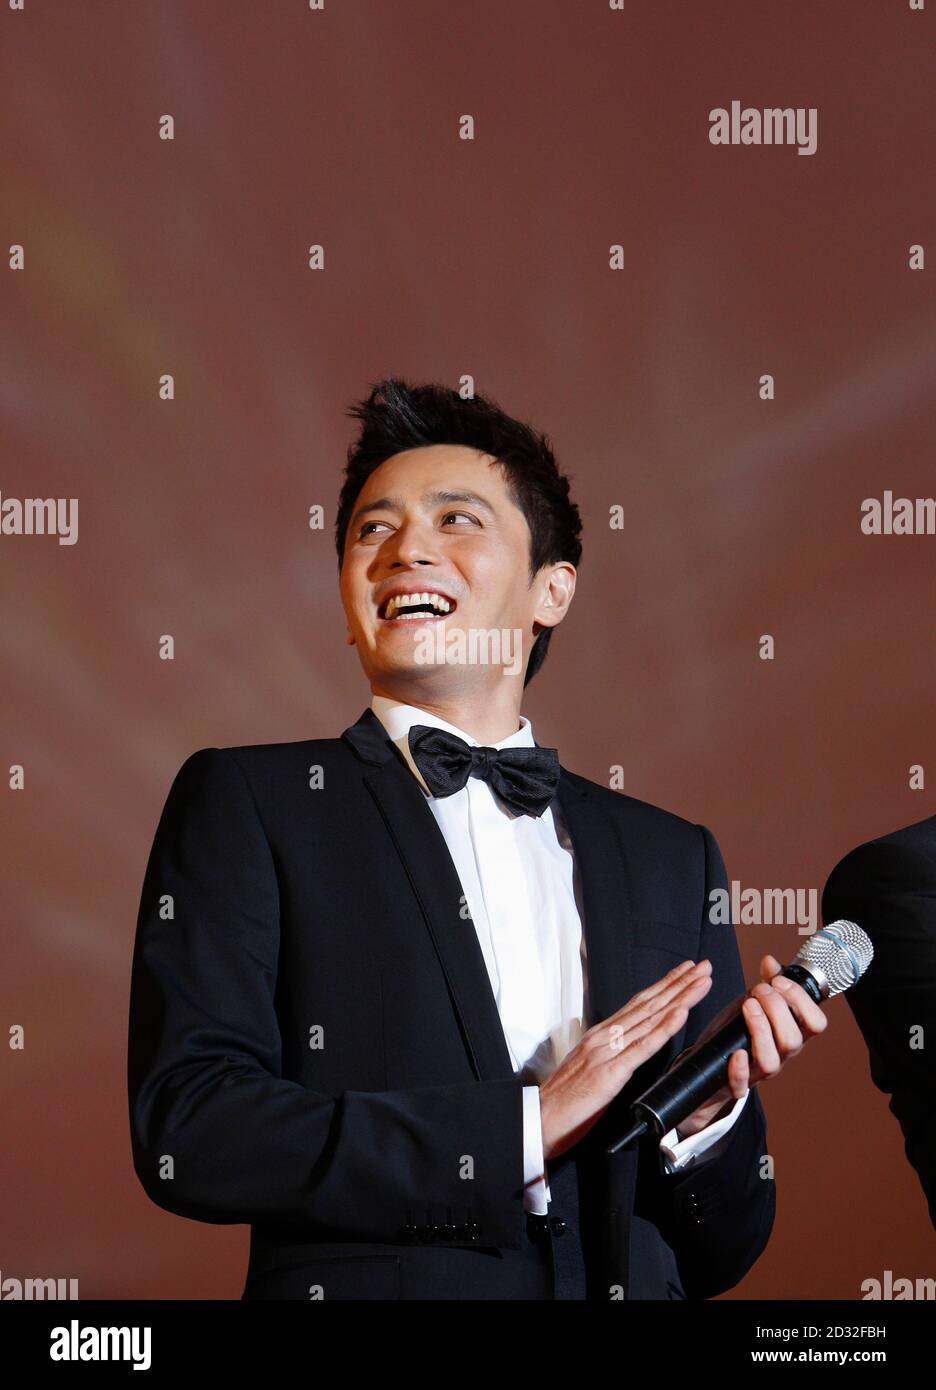 South Korean actor Jang Dong-gun from the movie "Good Morning President" reacts as he introduces his movie at the opening ceremony of the 14th Pusan International Film Festival in Busan, about 420 km (262 miles) southeast of Seoul, October 8, 2009.  REUTERS/Jo Yong-Hak (SOUTH KOREA ENTERTAINMENT) Stock Photo